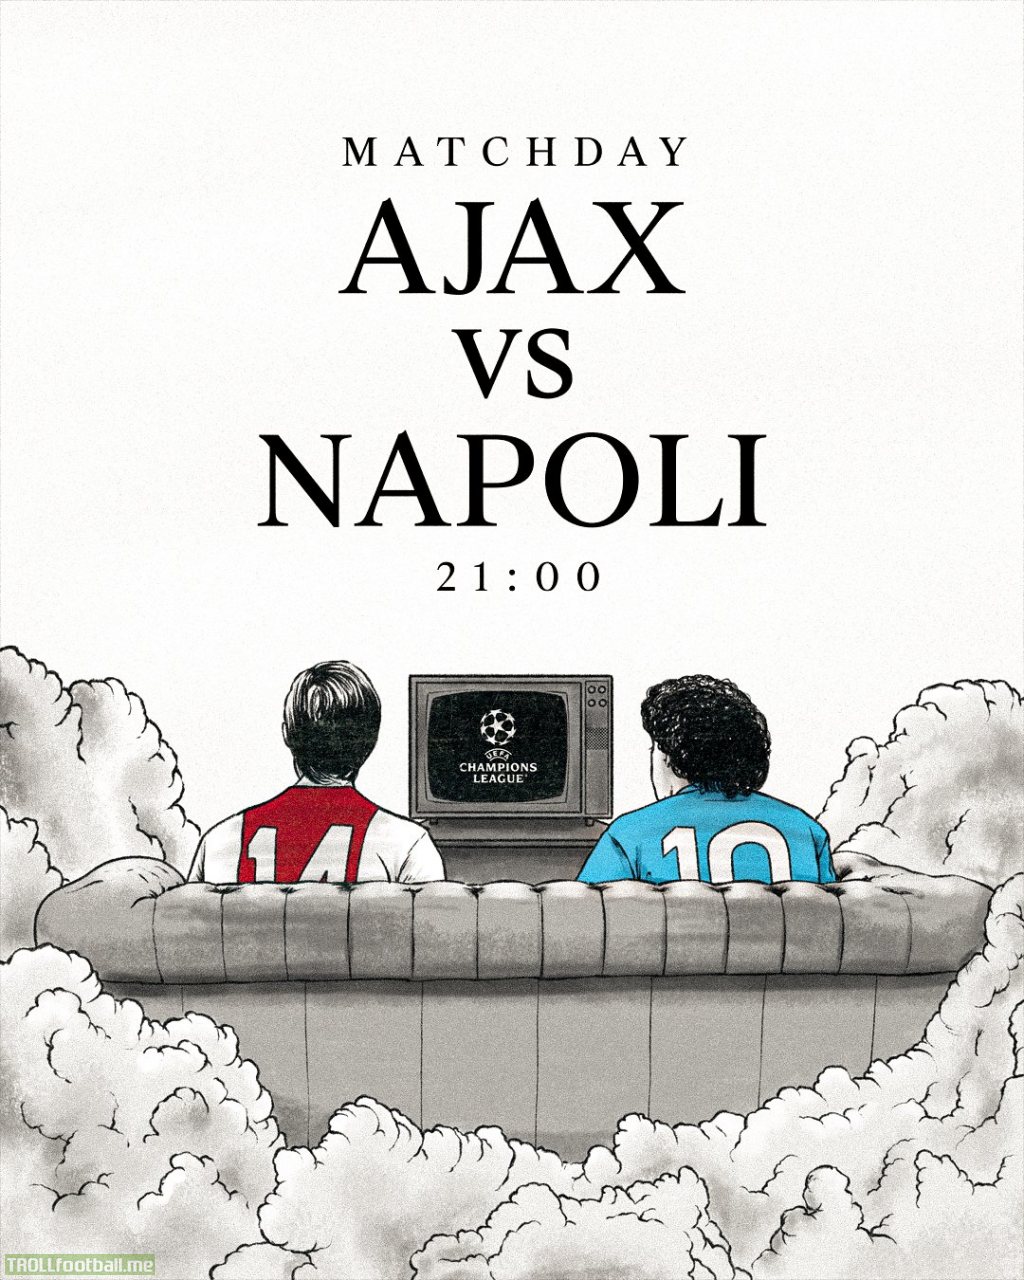 Official Ajax poster for their match against Napoli